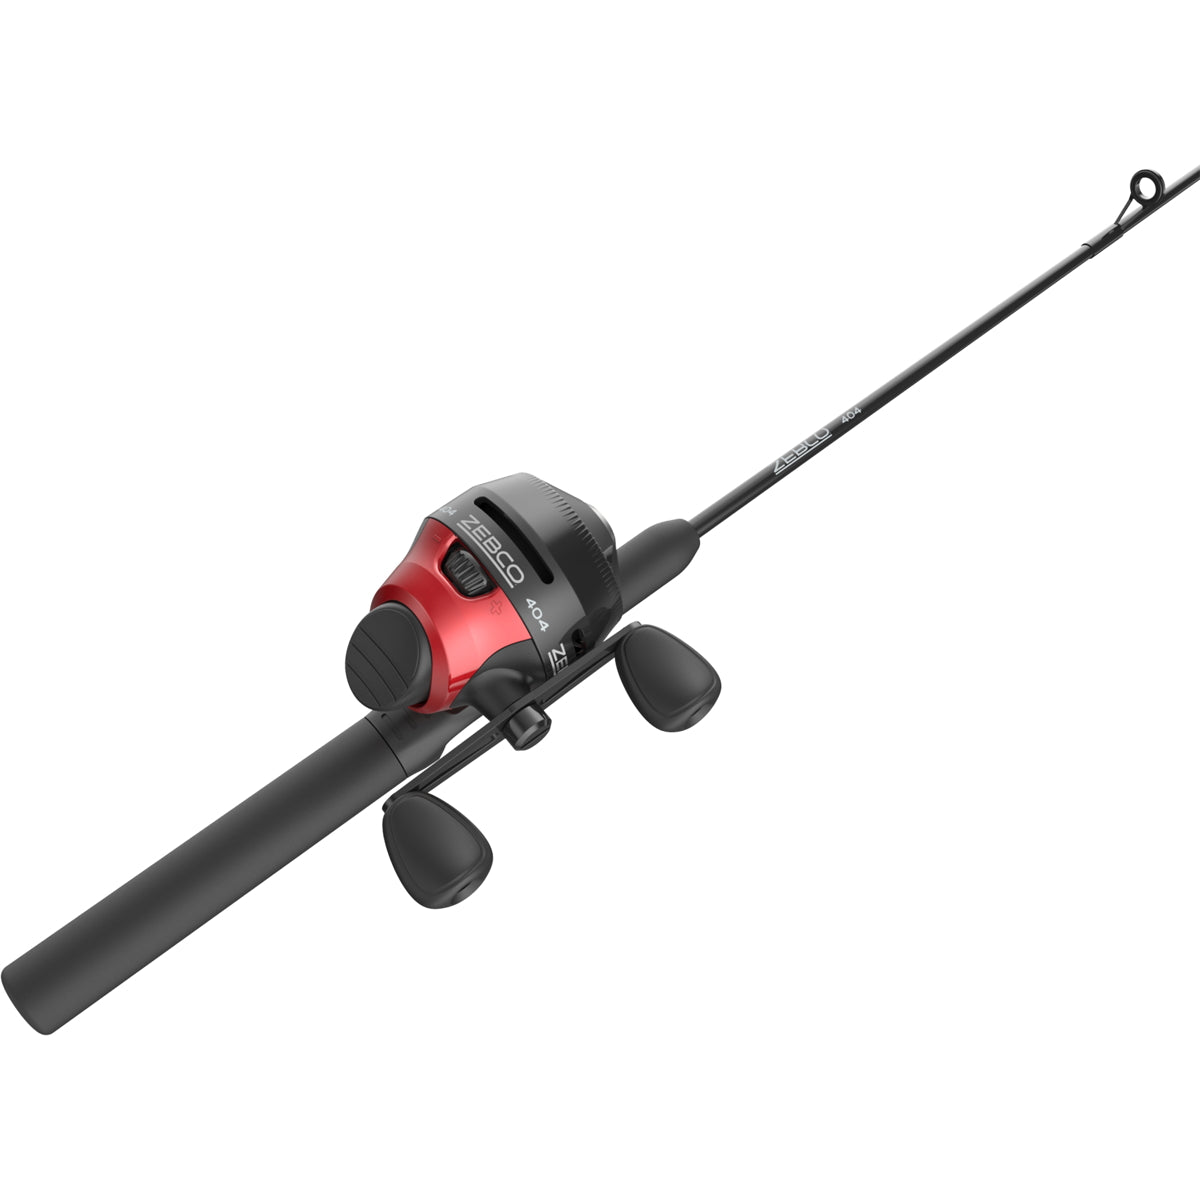 Photo of Zebco 404/602M Spincast Combo - Bulk for sale at United Tackle Shops.